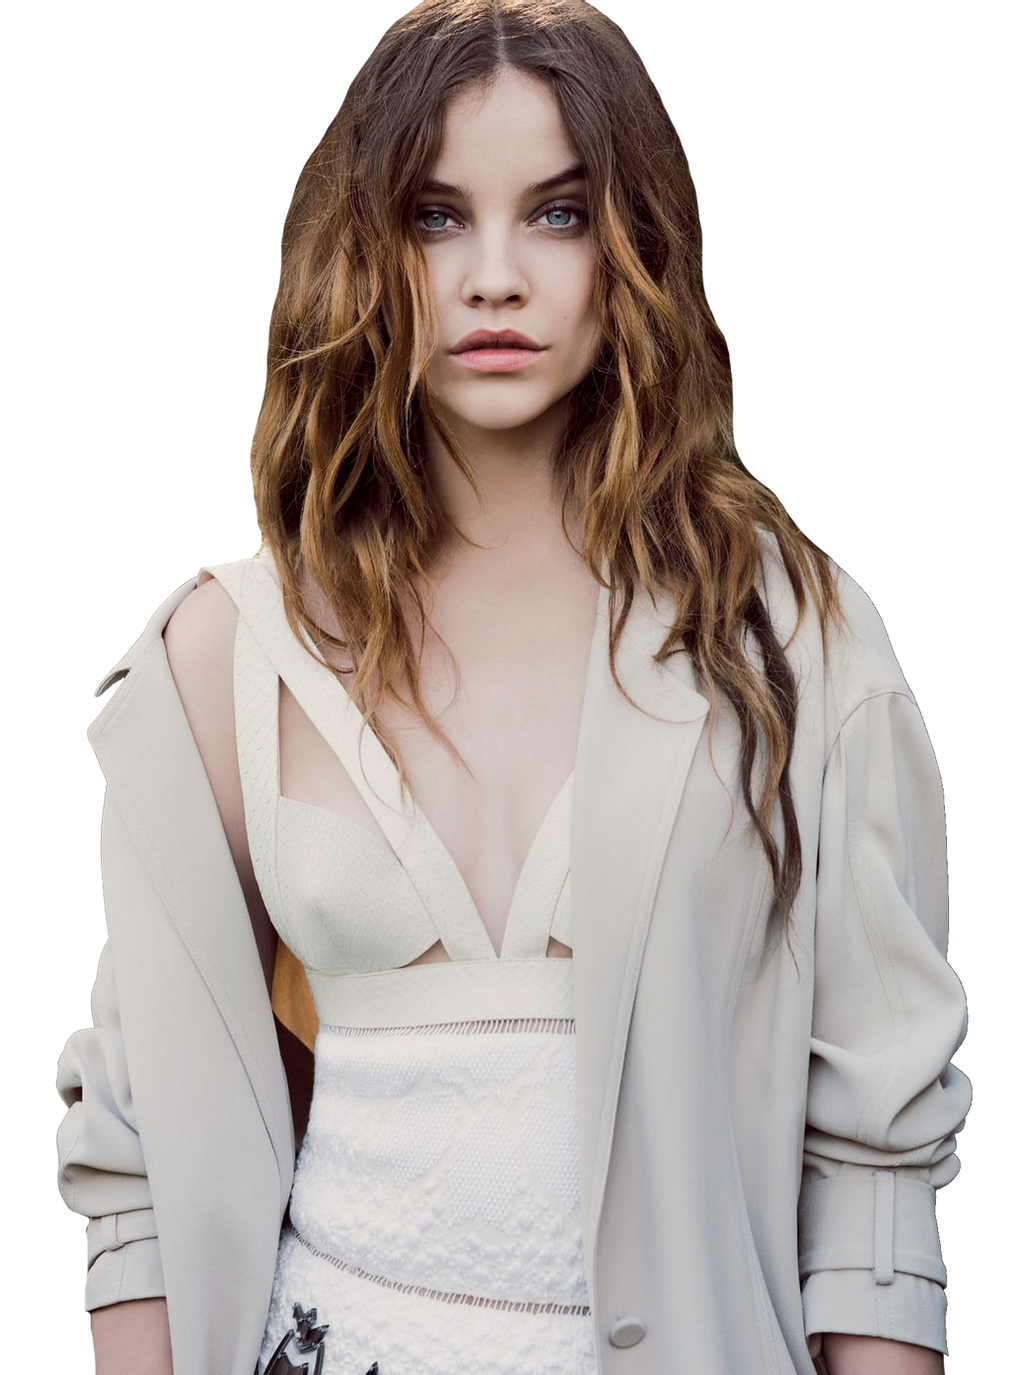 Barbara Palvin Model PNG Clipart Background